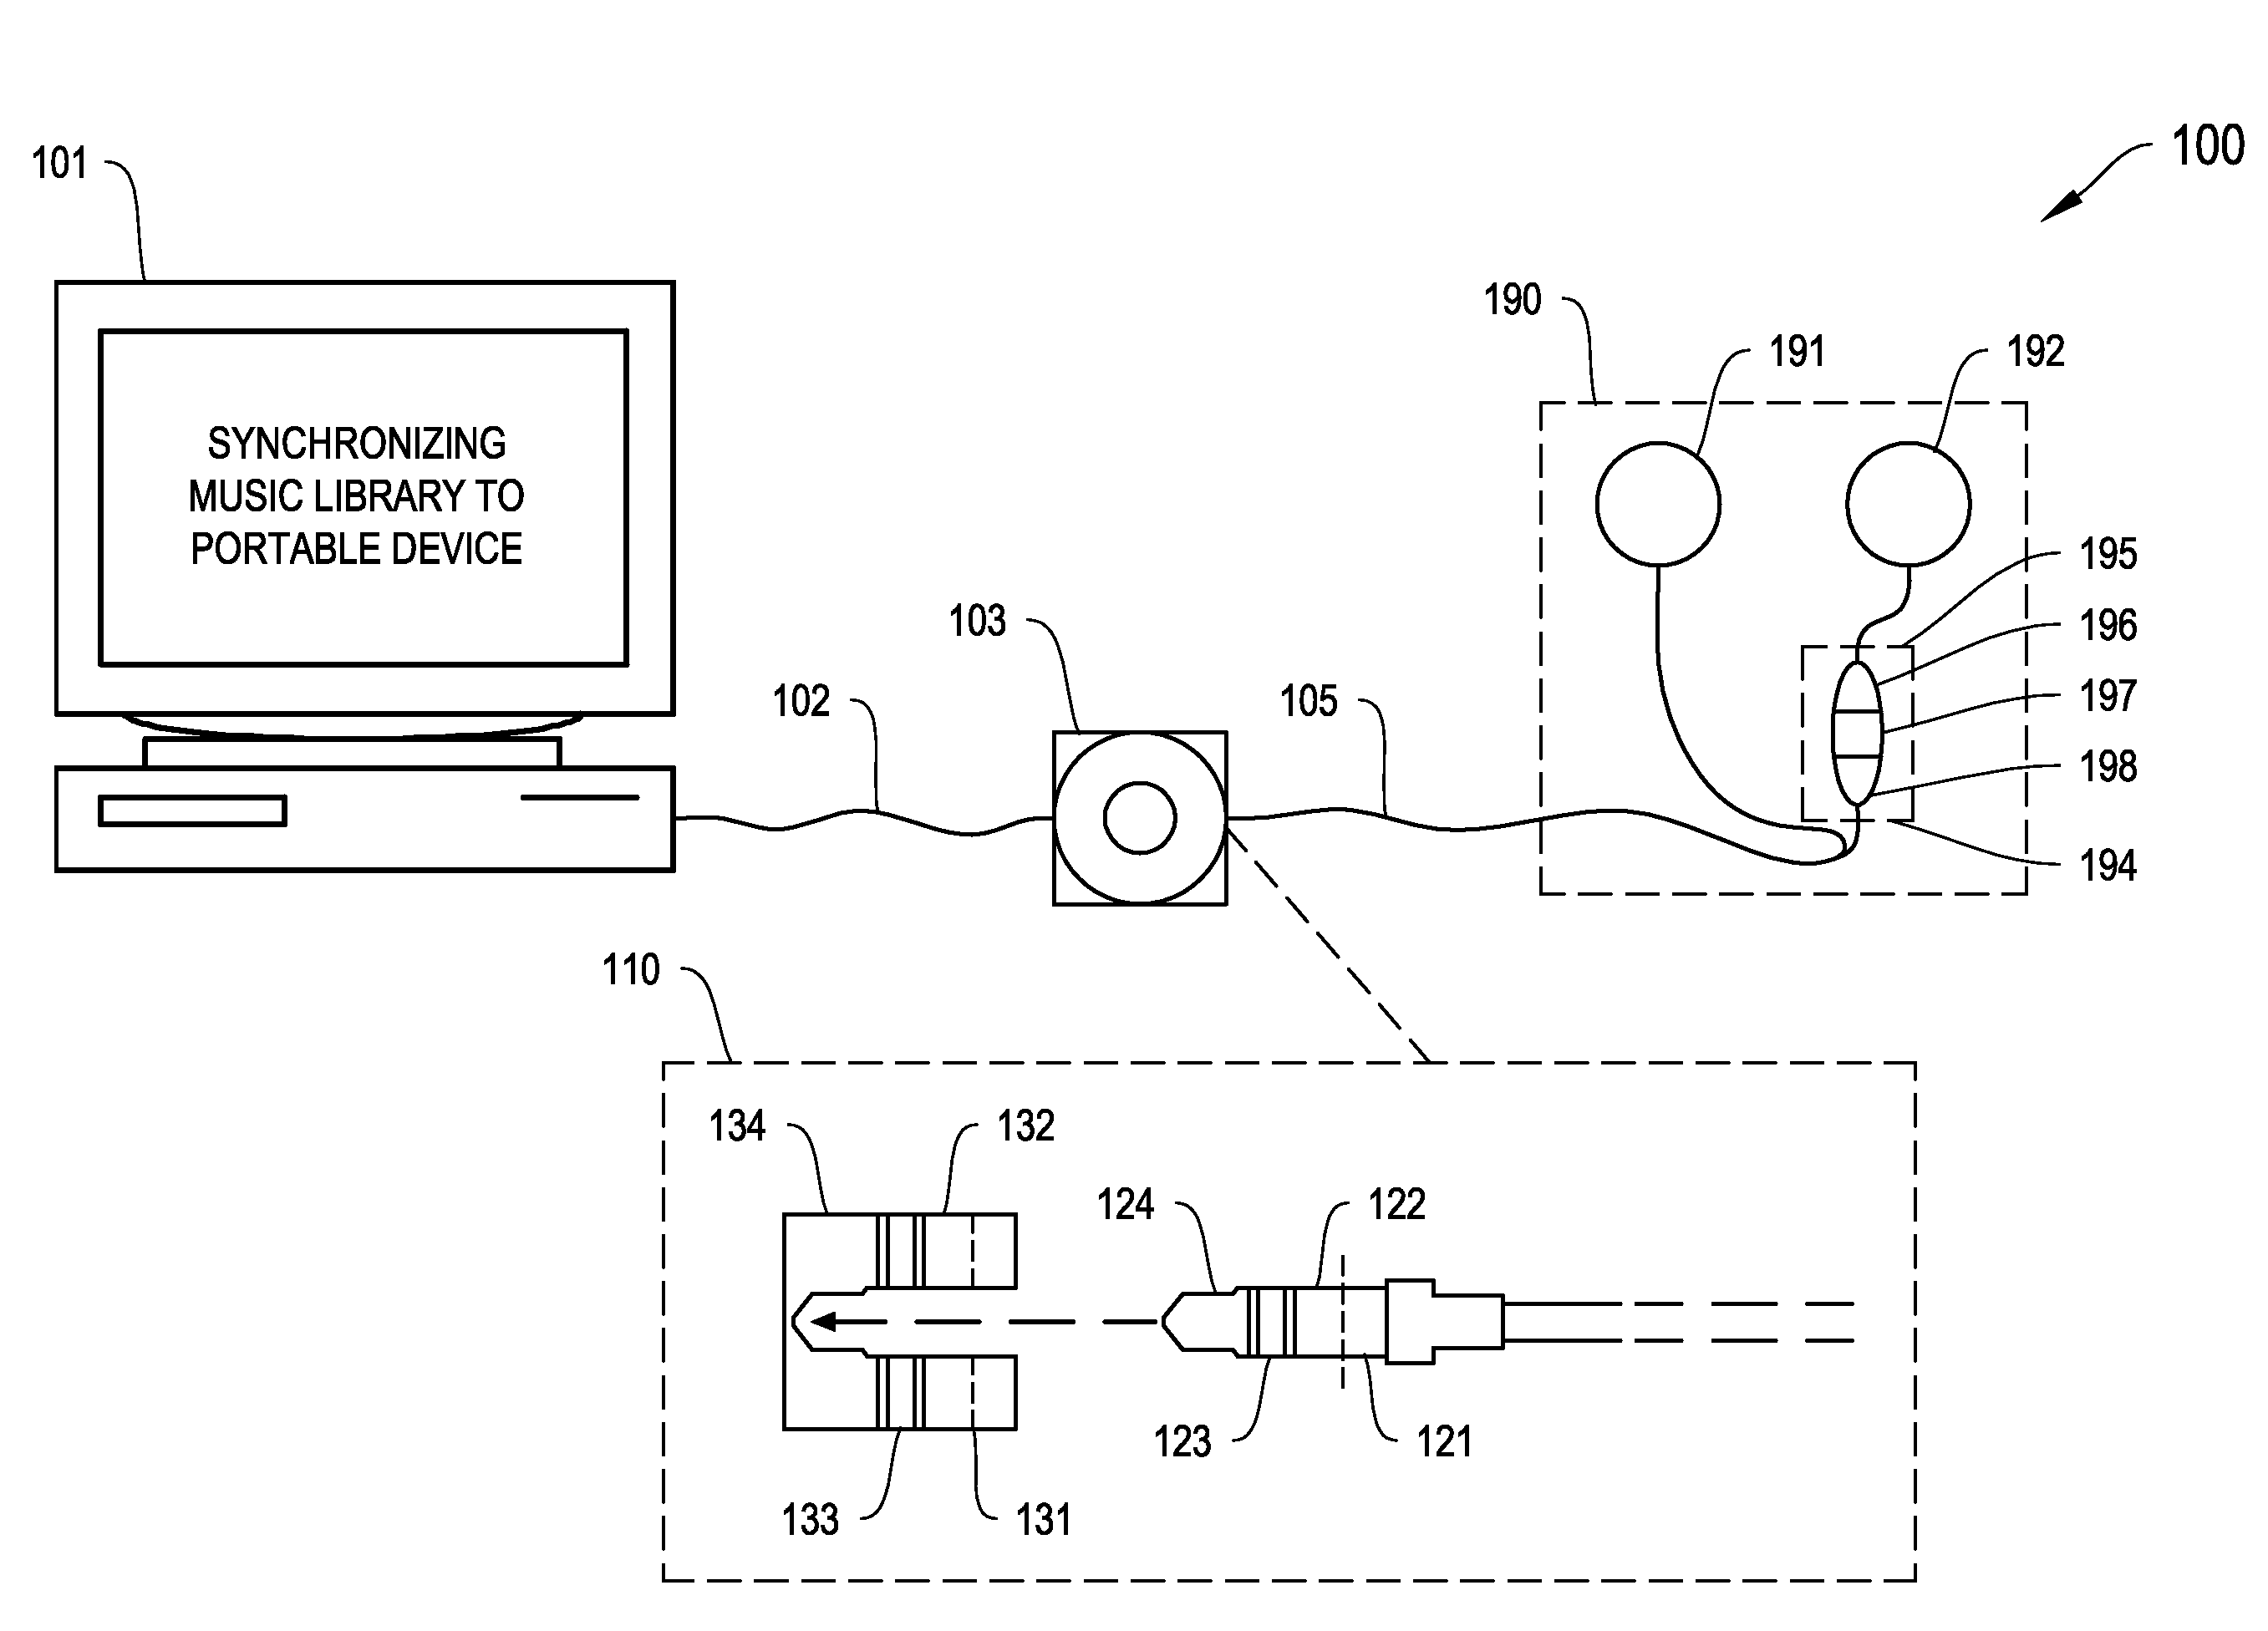 Electronic device control based on user gestures applied to a media headset